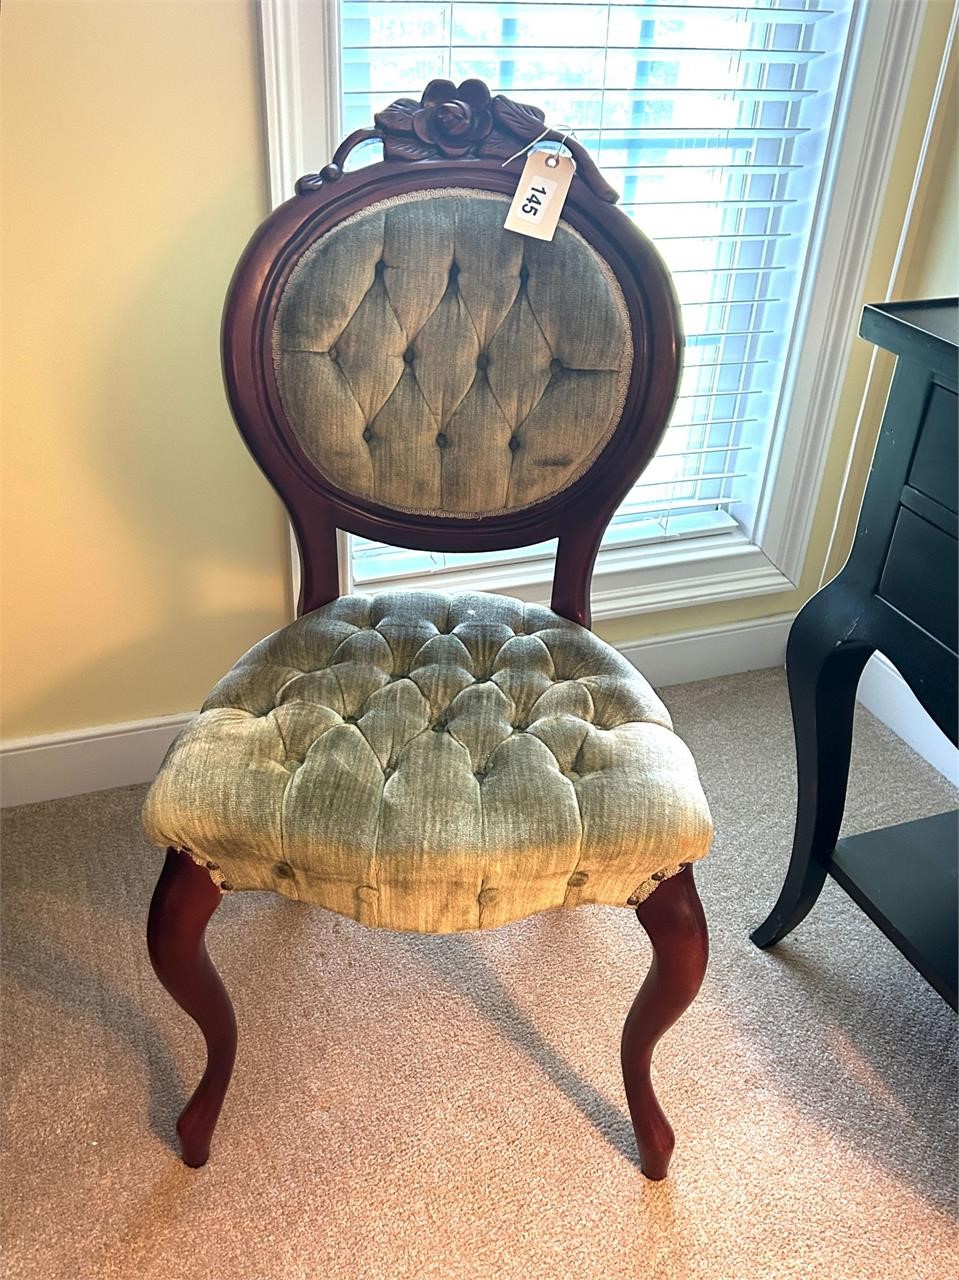 ANTIQUE TUFTED ROSE BACK CHAIR & ART